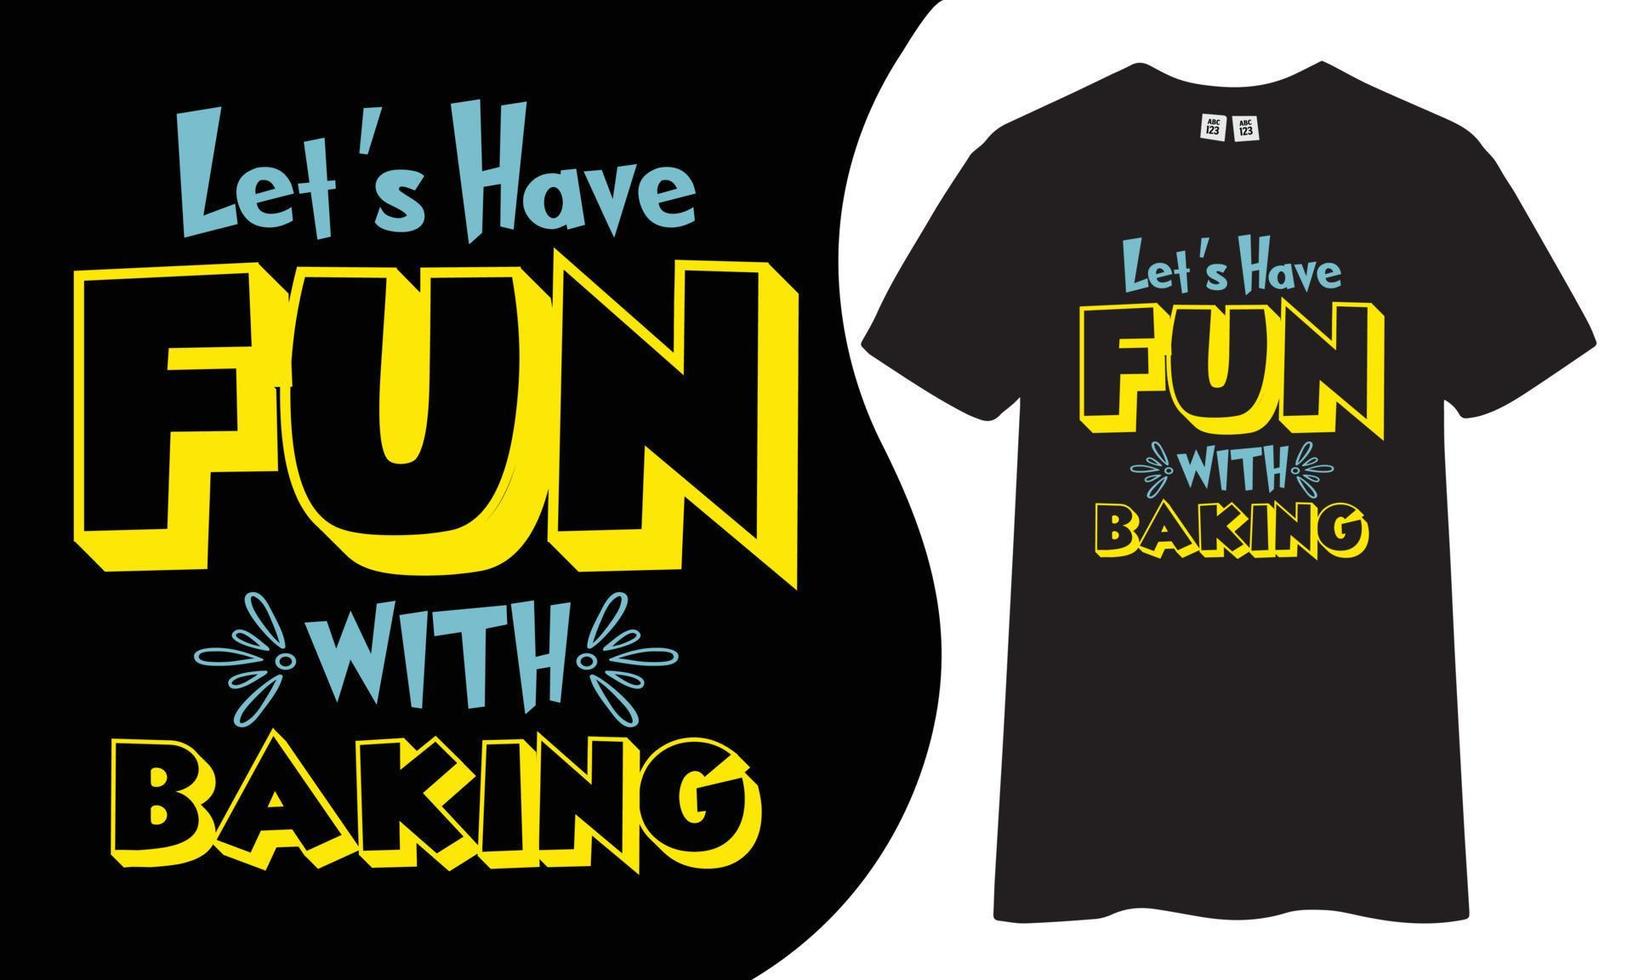 Let's have fun with baking t shirt design. vector